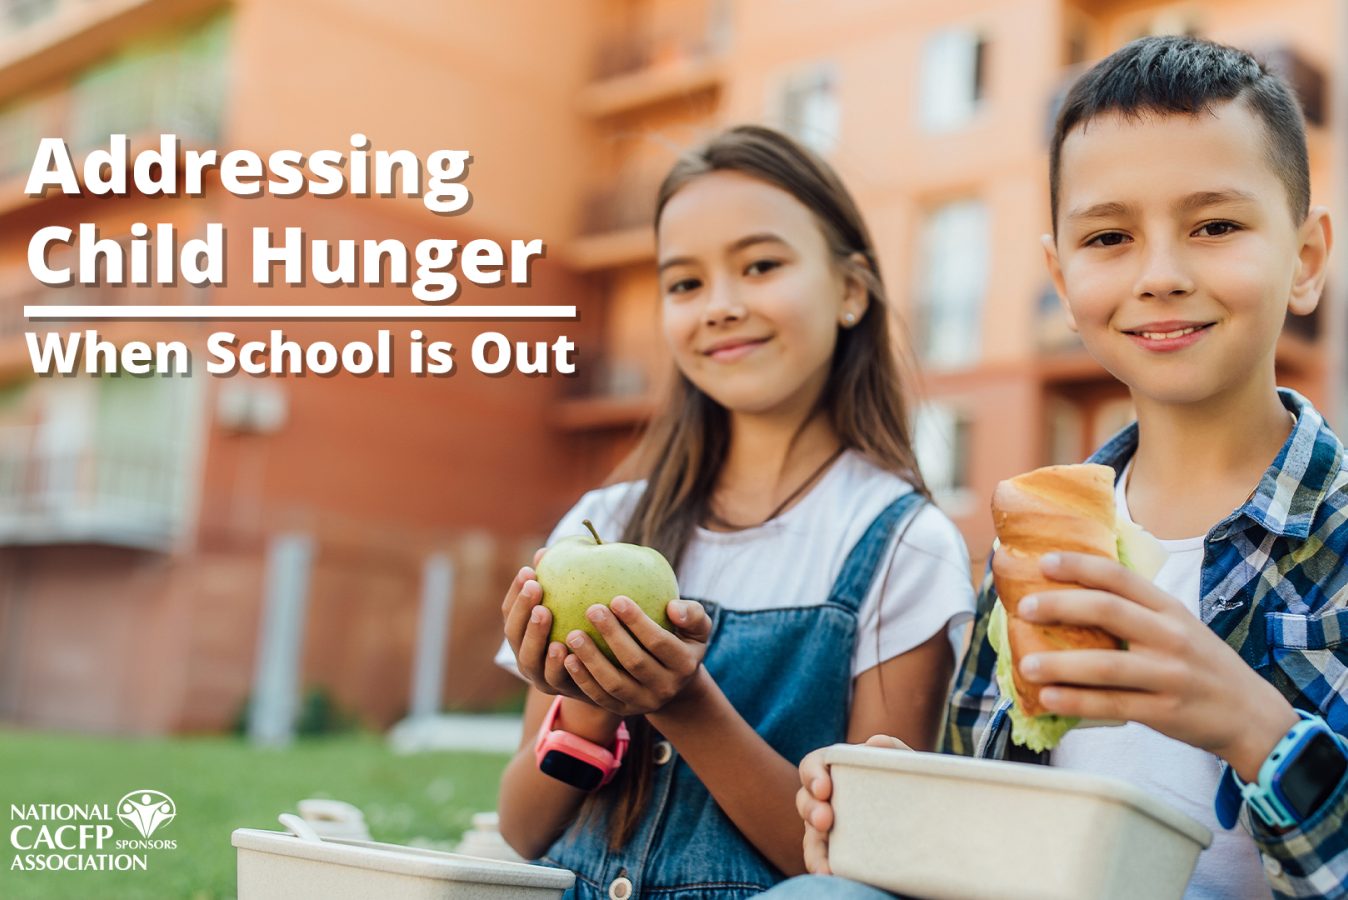 Addressing Child Hunger While School is Out_4x3